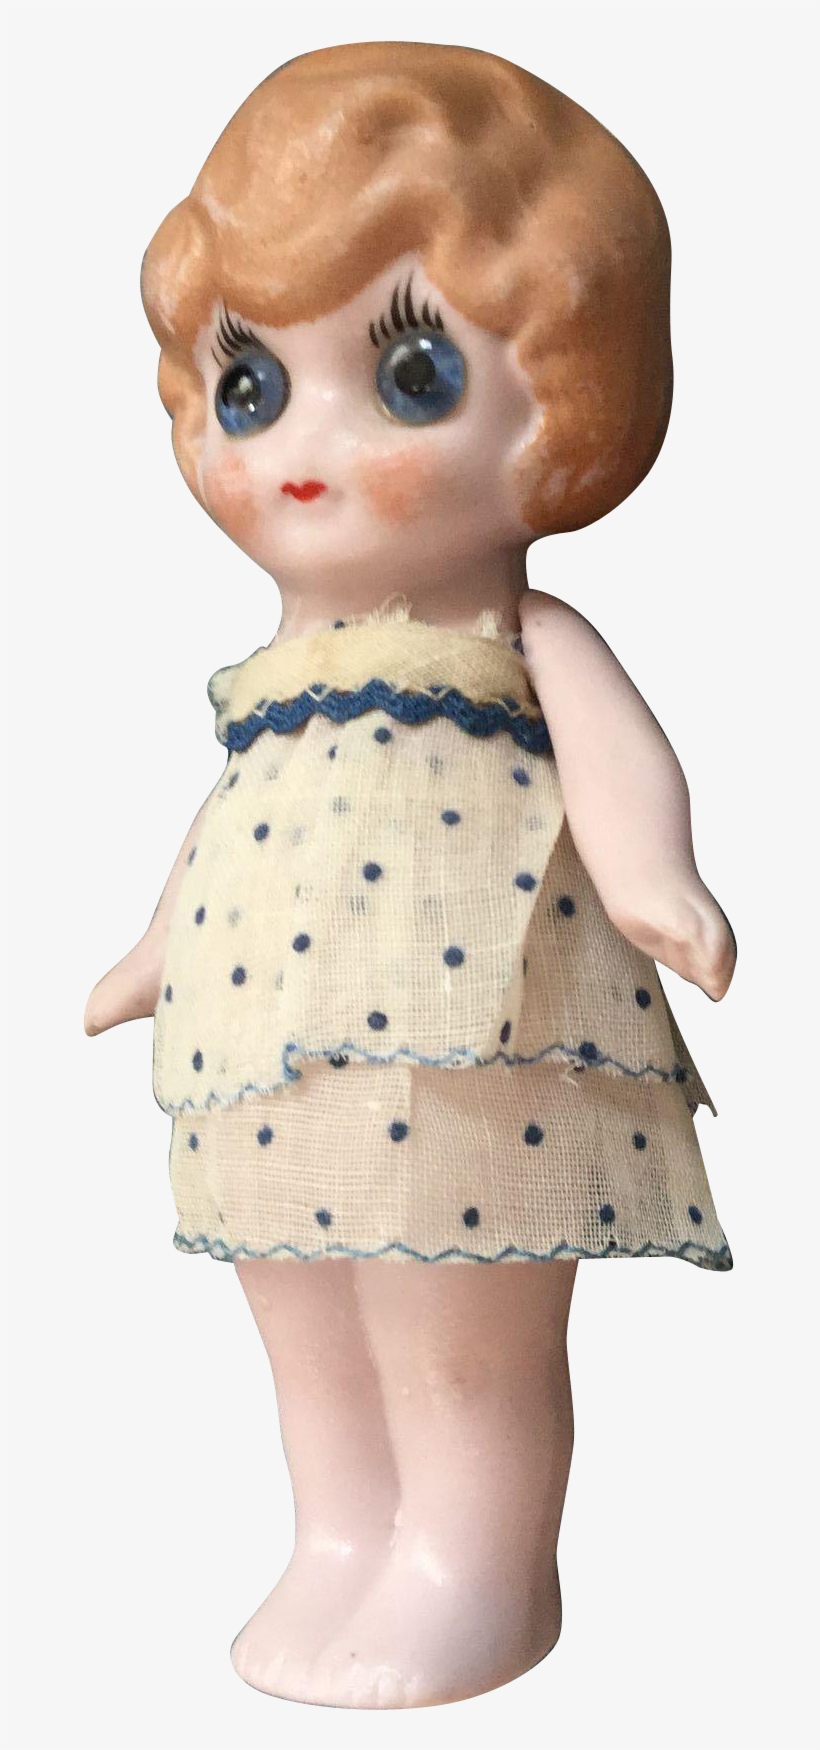 German, Googly Eyed Doll - Doll, transparent png #846843